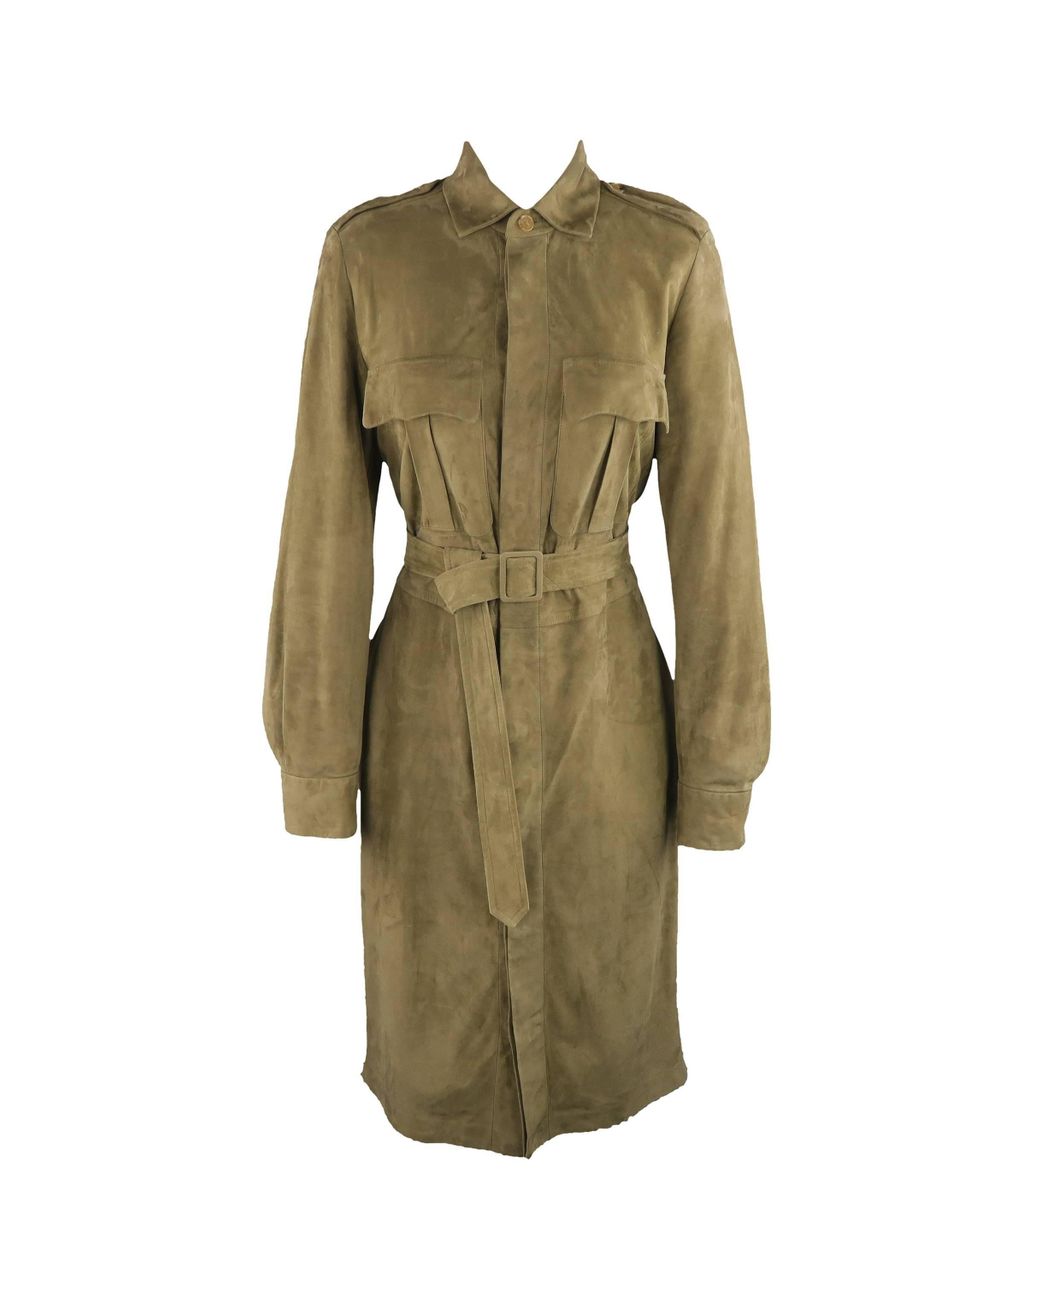 Ralph Lauren Collection Olive Suede Safari Dress - Size 8 in Green - Lyst